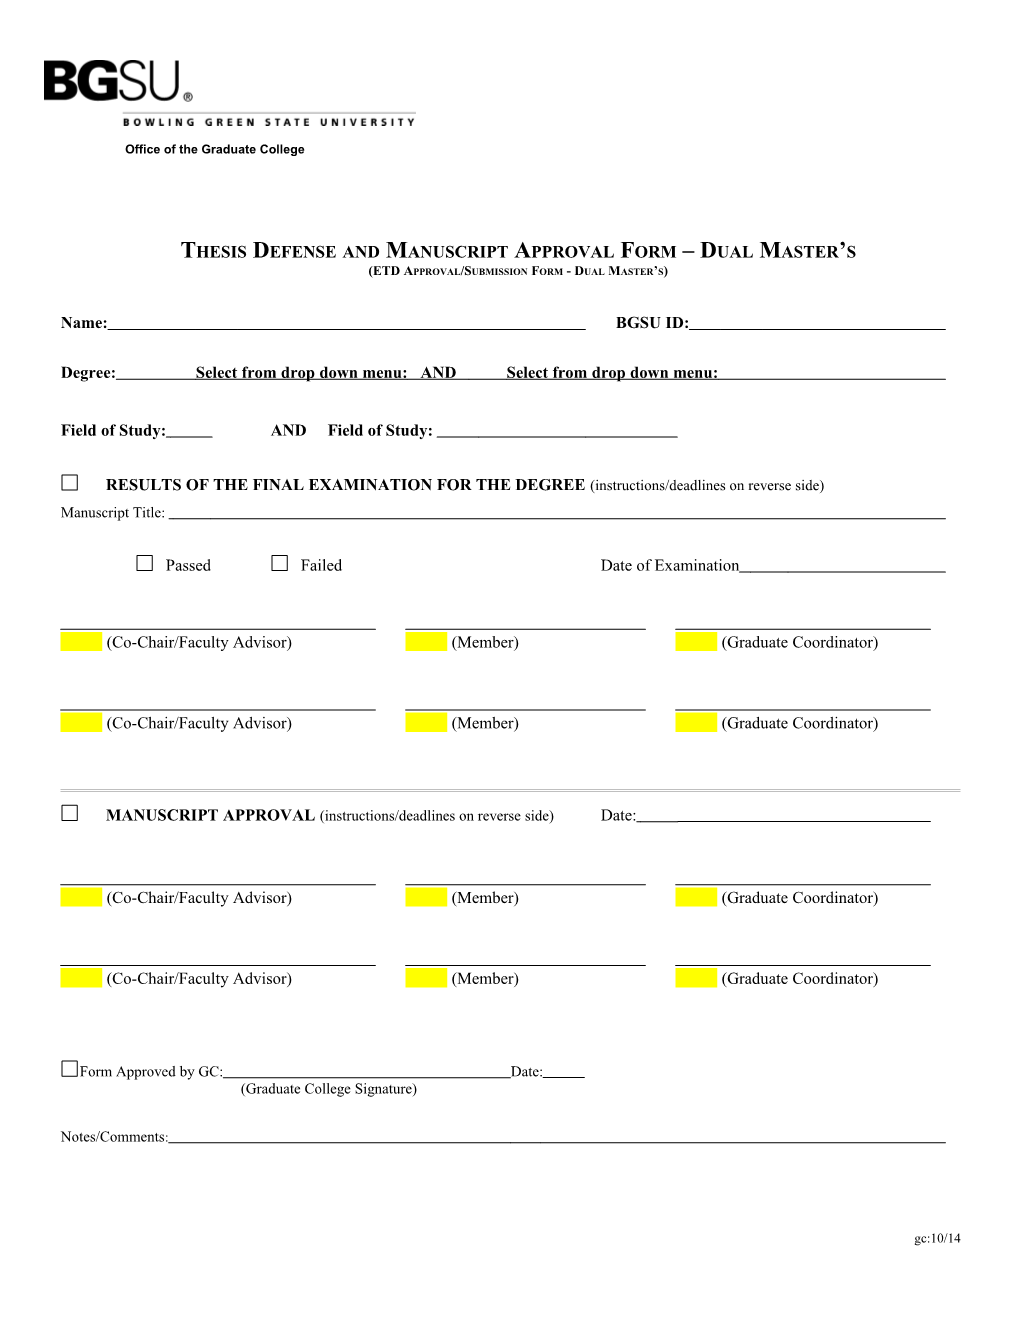 ETD Approval/Submission Form Dual Master's